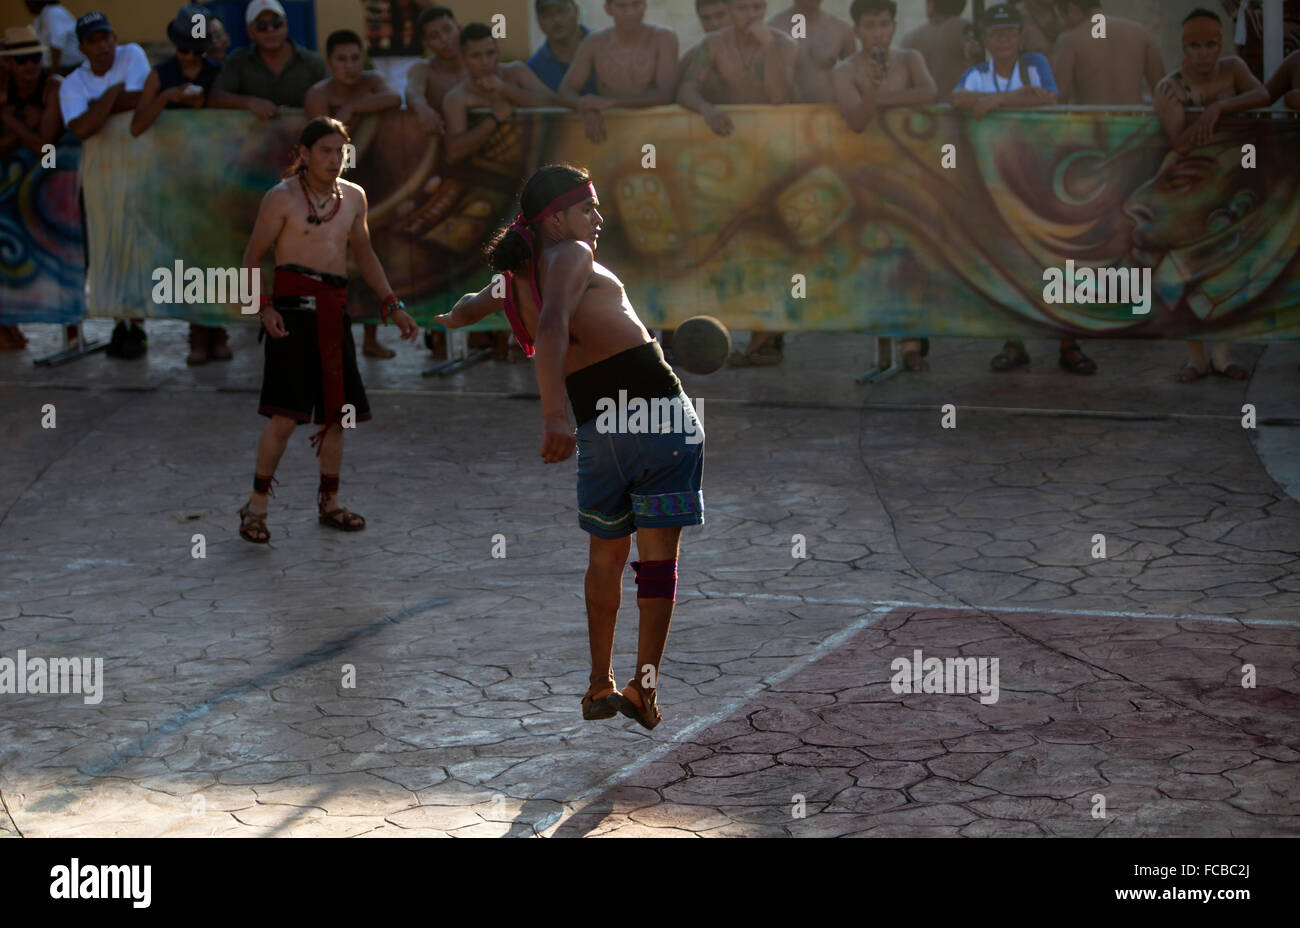 A Mayan Ball Player from Guatemala hits the ball with his hip during the first ®Pok Ta Pok® World Cup in Piste, Tinum, Yucatan, Stock Photo